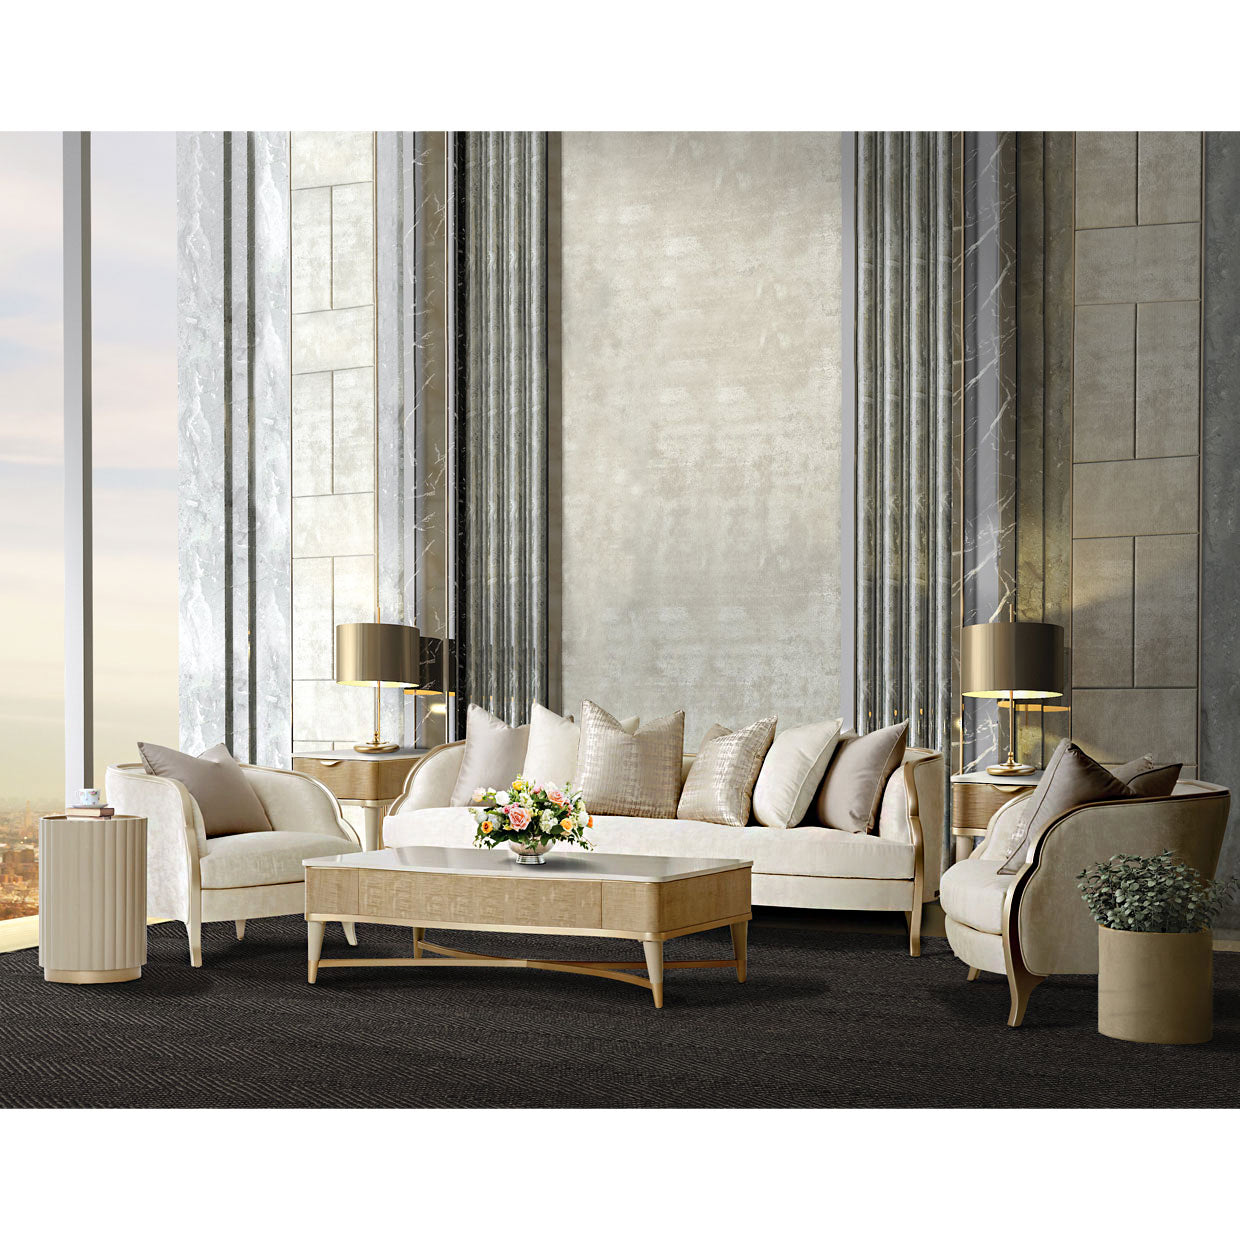 MalibuCrest Sofa, Romance-inspired sofa, Curved sofa design, V-notch arms, Chardonnay finish, Cloud White upholstery, Tonal marble jacquard fabric, Softly textured seat, Winged sides, Accent pillows included, Home atmosphere enhancement, Elegant sofa, Living room centerpiece, Comfortable seating, Stylish sofa design, dream art, Michael amini